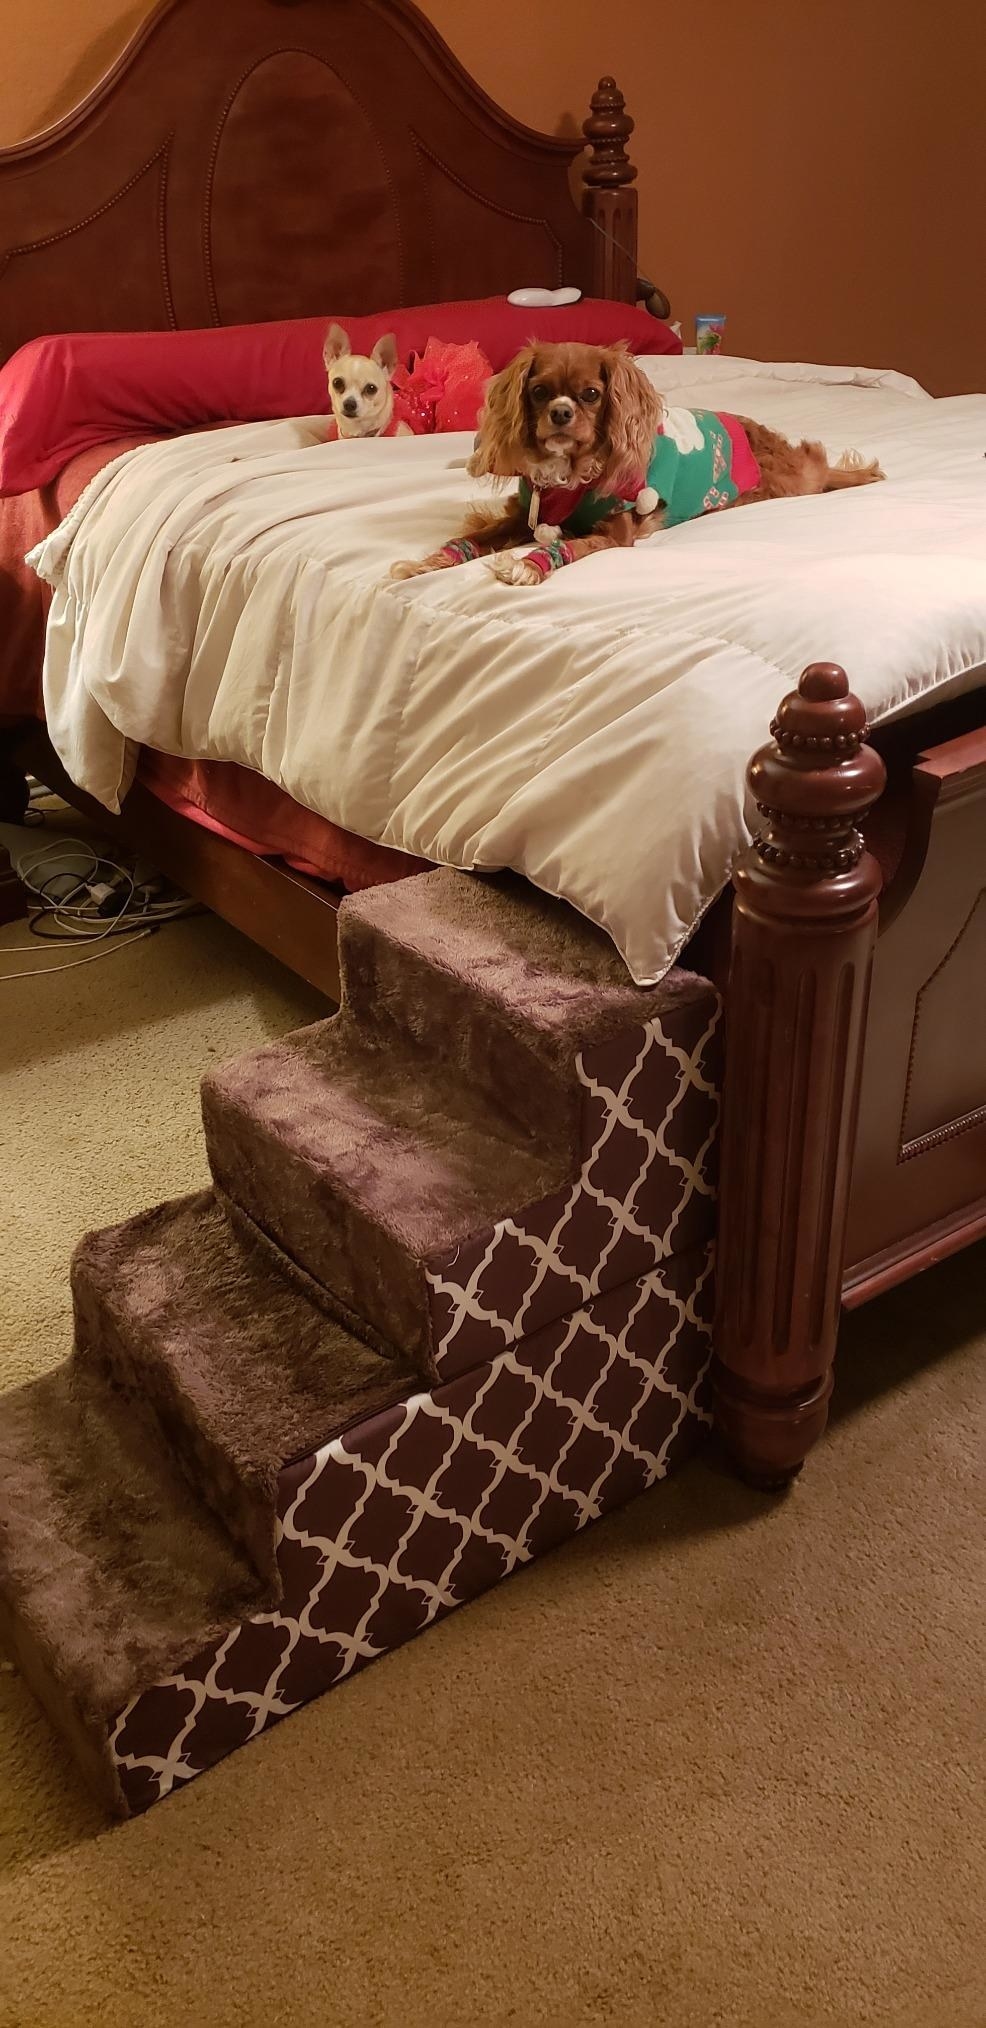 The stairs in a lattice print pattern, set up next to a full-sized bed